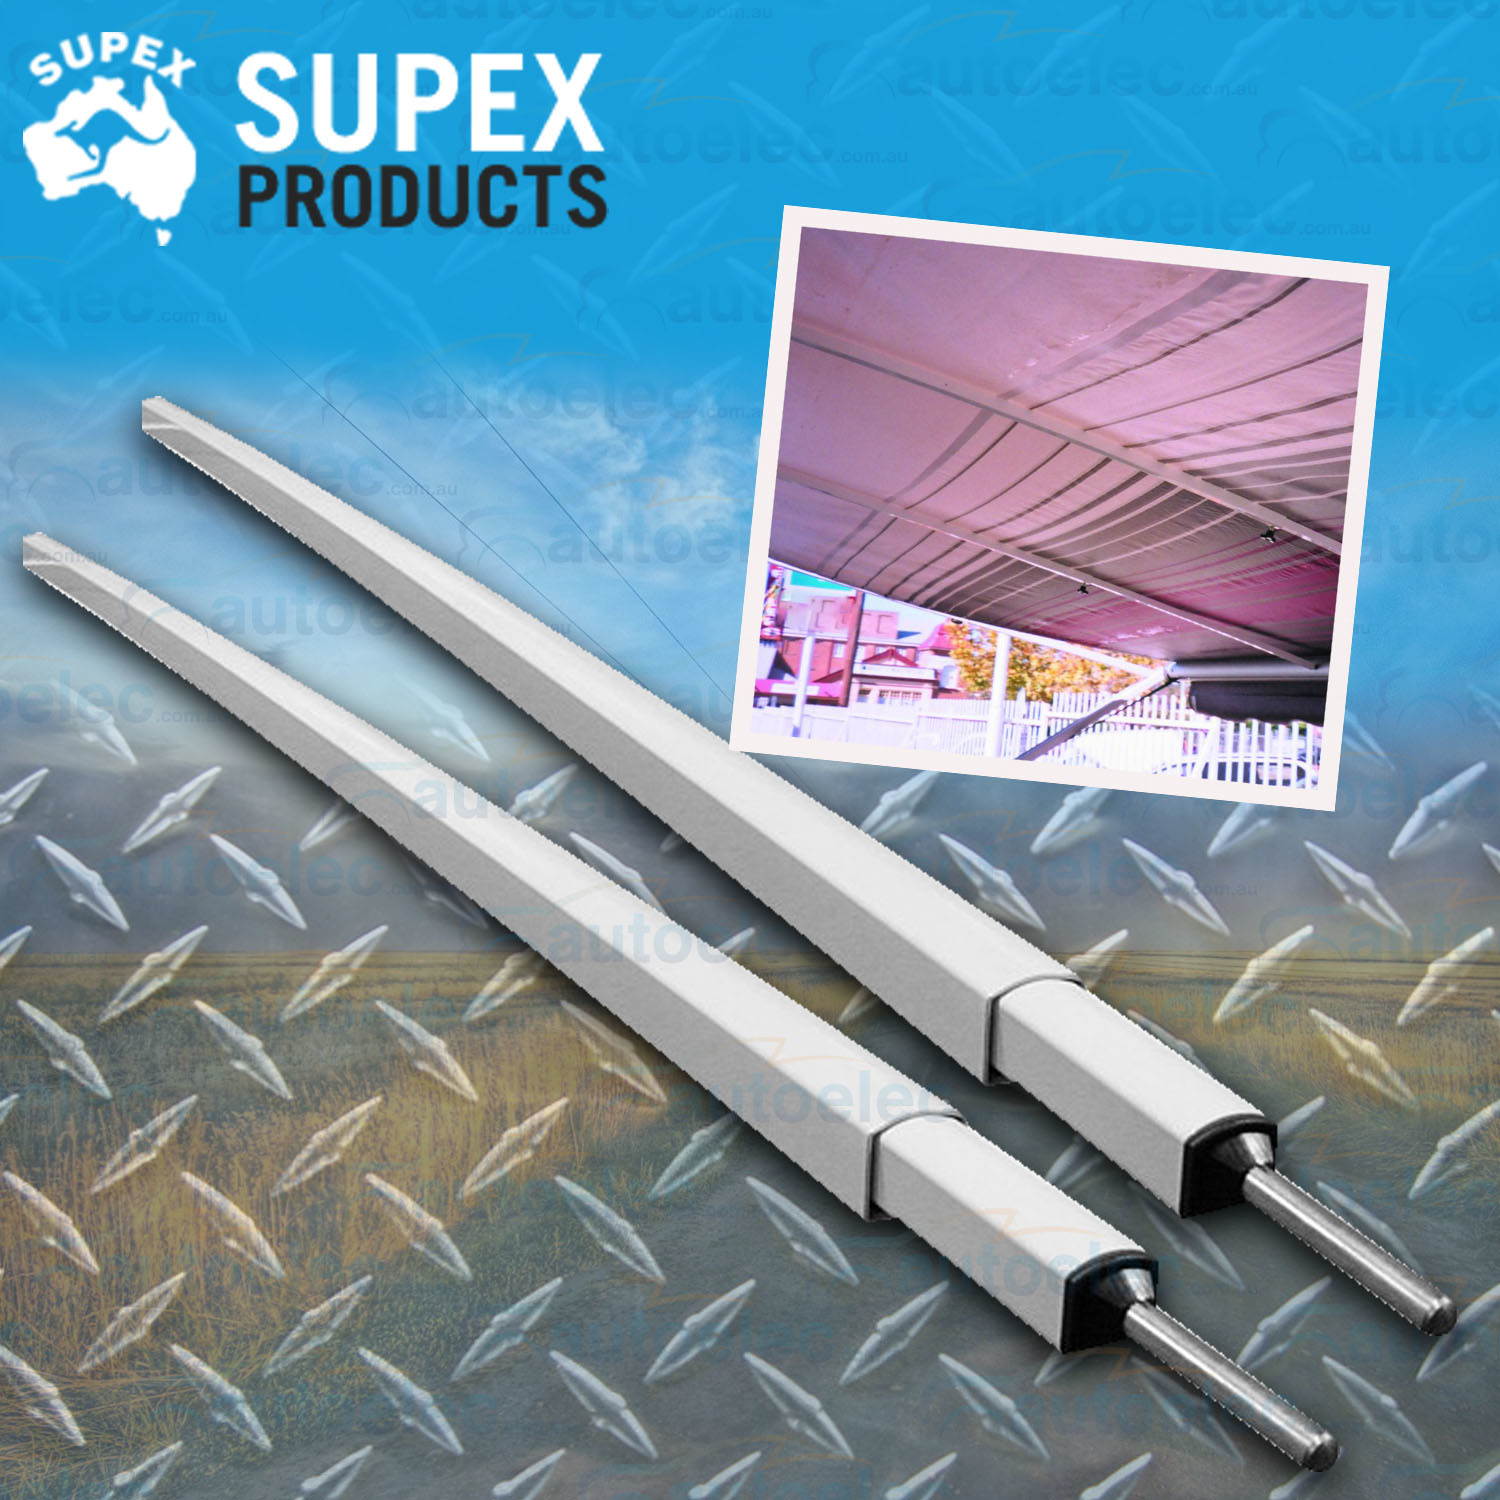 2x SUPEX ACUTE CURVED ROOF RAFTER RAFTERS SUIT DOMETIC ROLL OUT